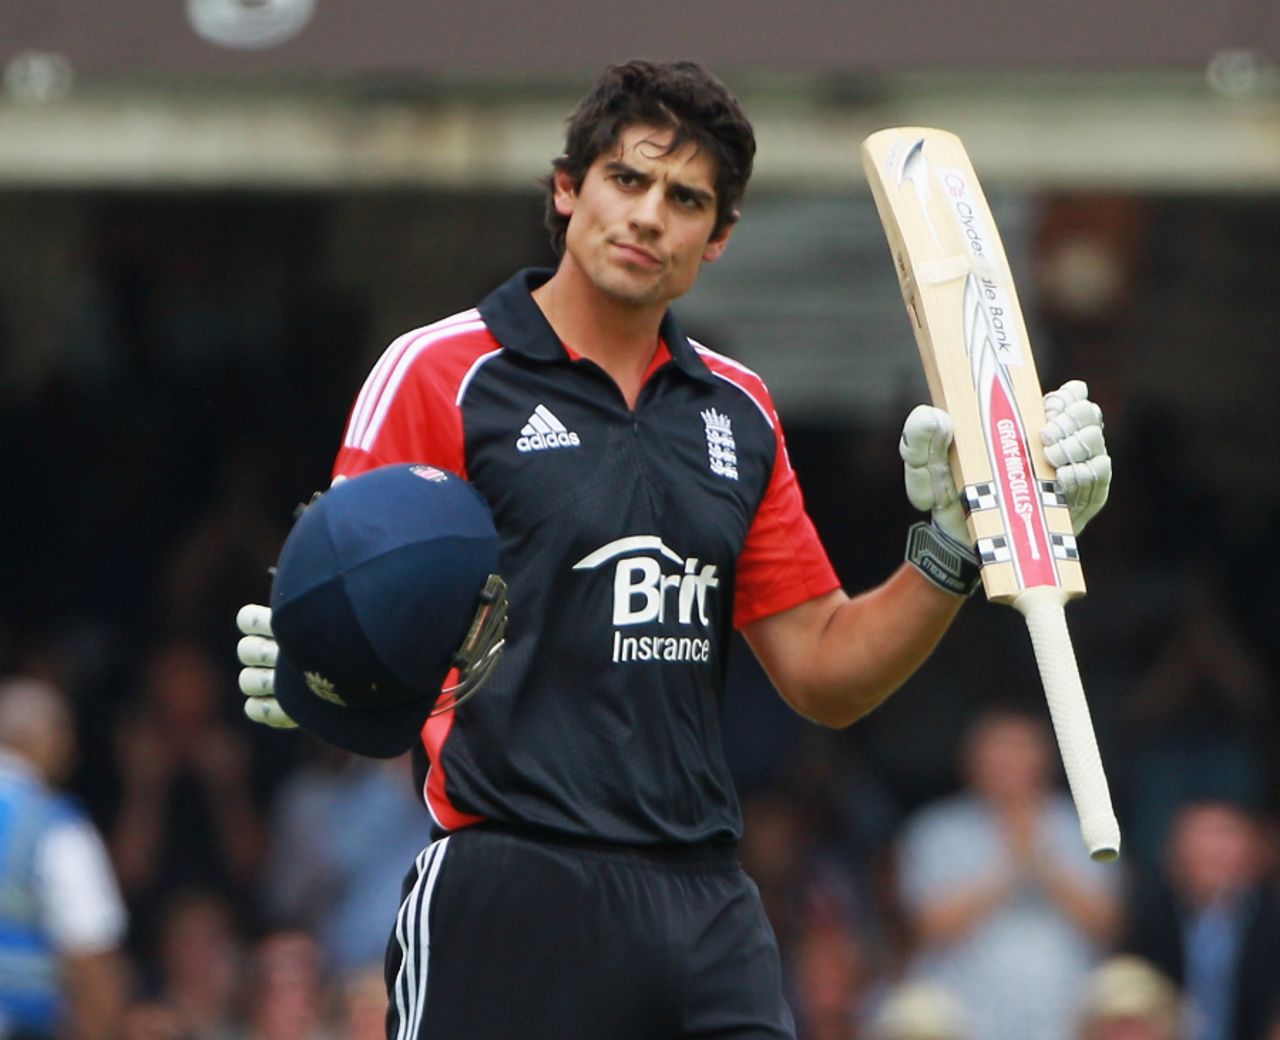 Alastair Cook acknowledges applause for his hundred at Lord's, England v Sri Lanka, 3rd ODI, Lord's July 3 2011